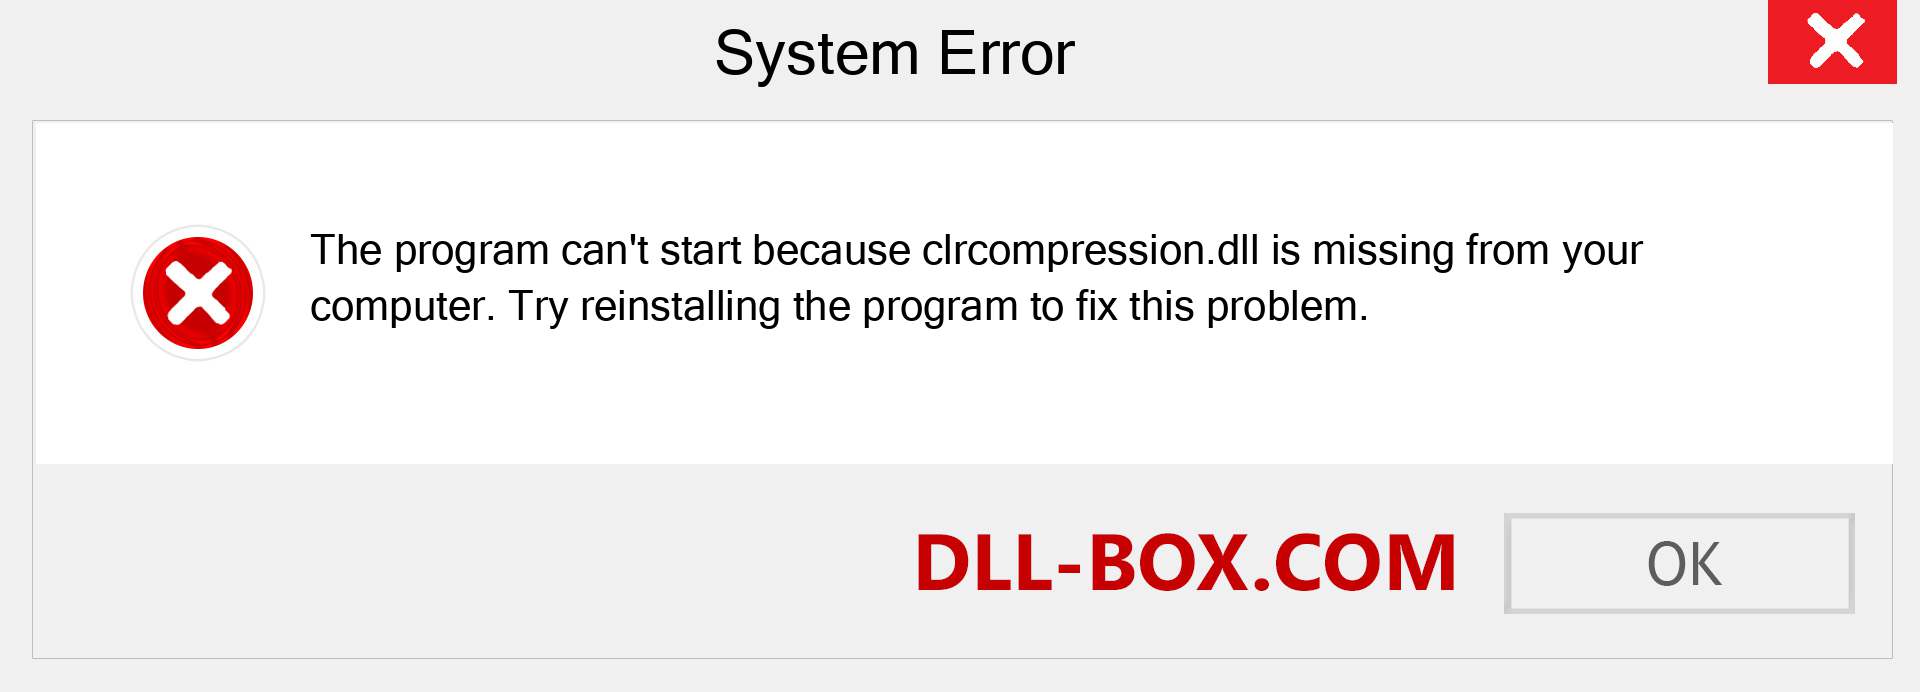  clrcompression.dll file is missing?. Download for Windows 7, 8, 10 - Fix  clrcompression dll Missing Error on Windows, photos, images